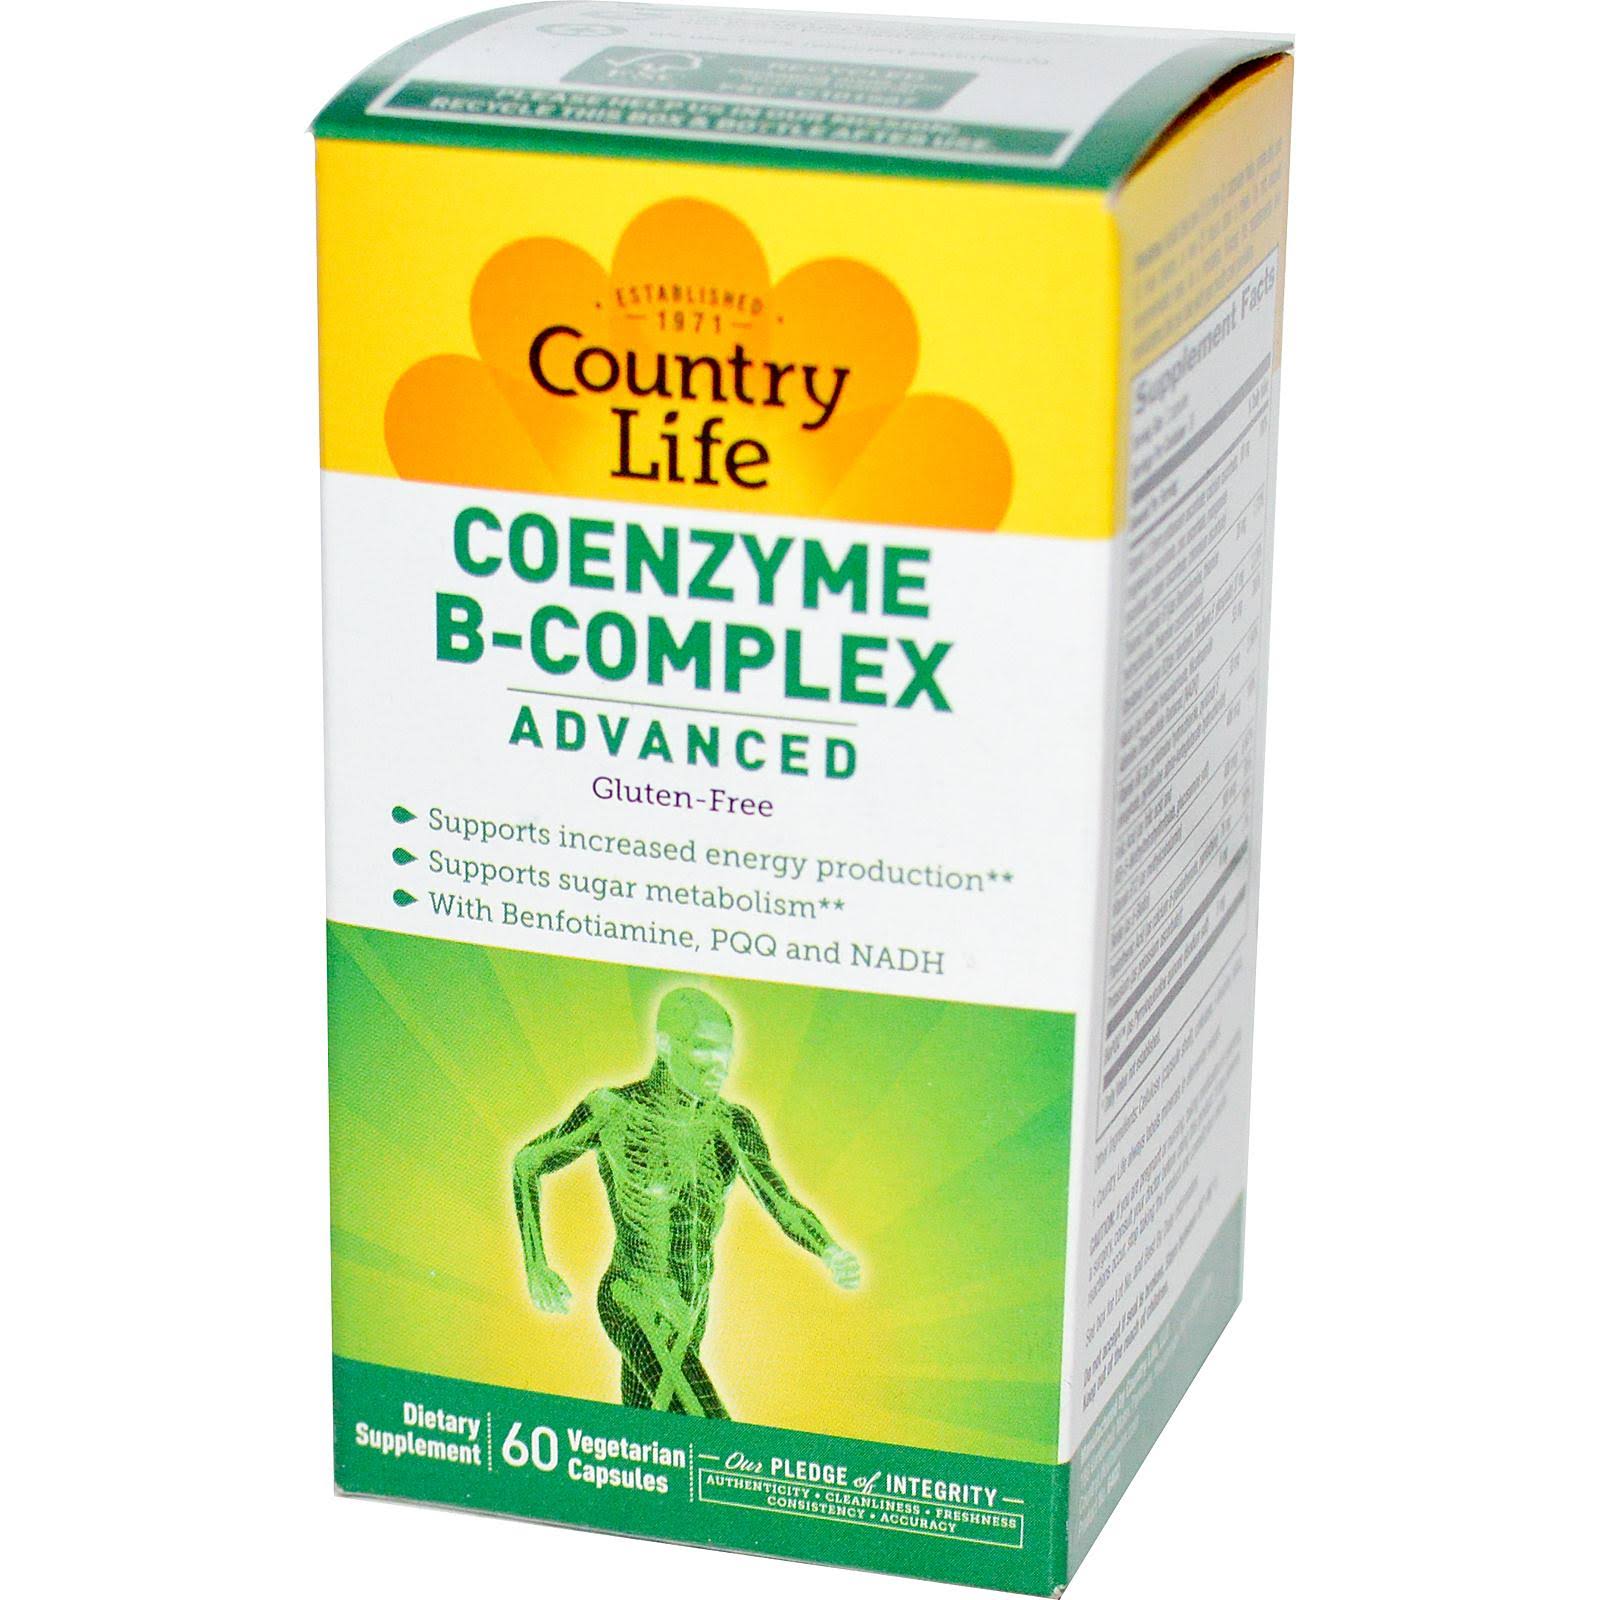 Country Life Coenzyme B Complx Advanced Capsules Supplement - 60 Count